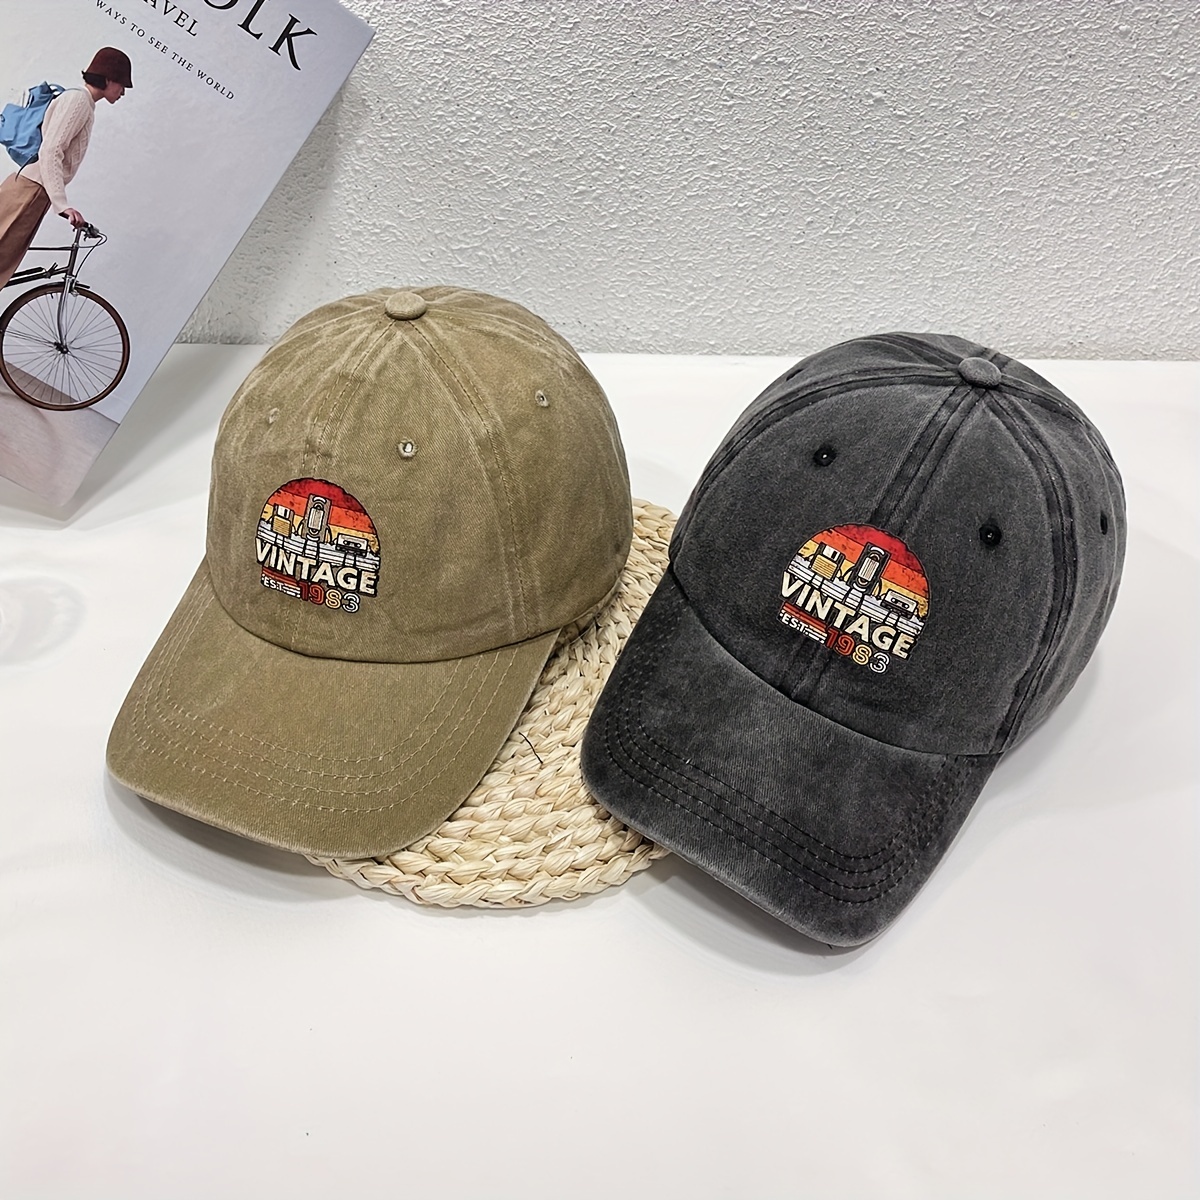 Legacy Hats for Women